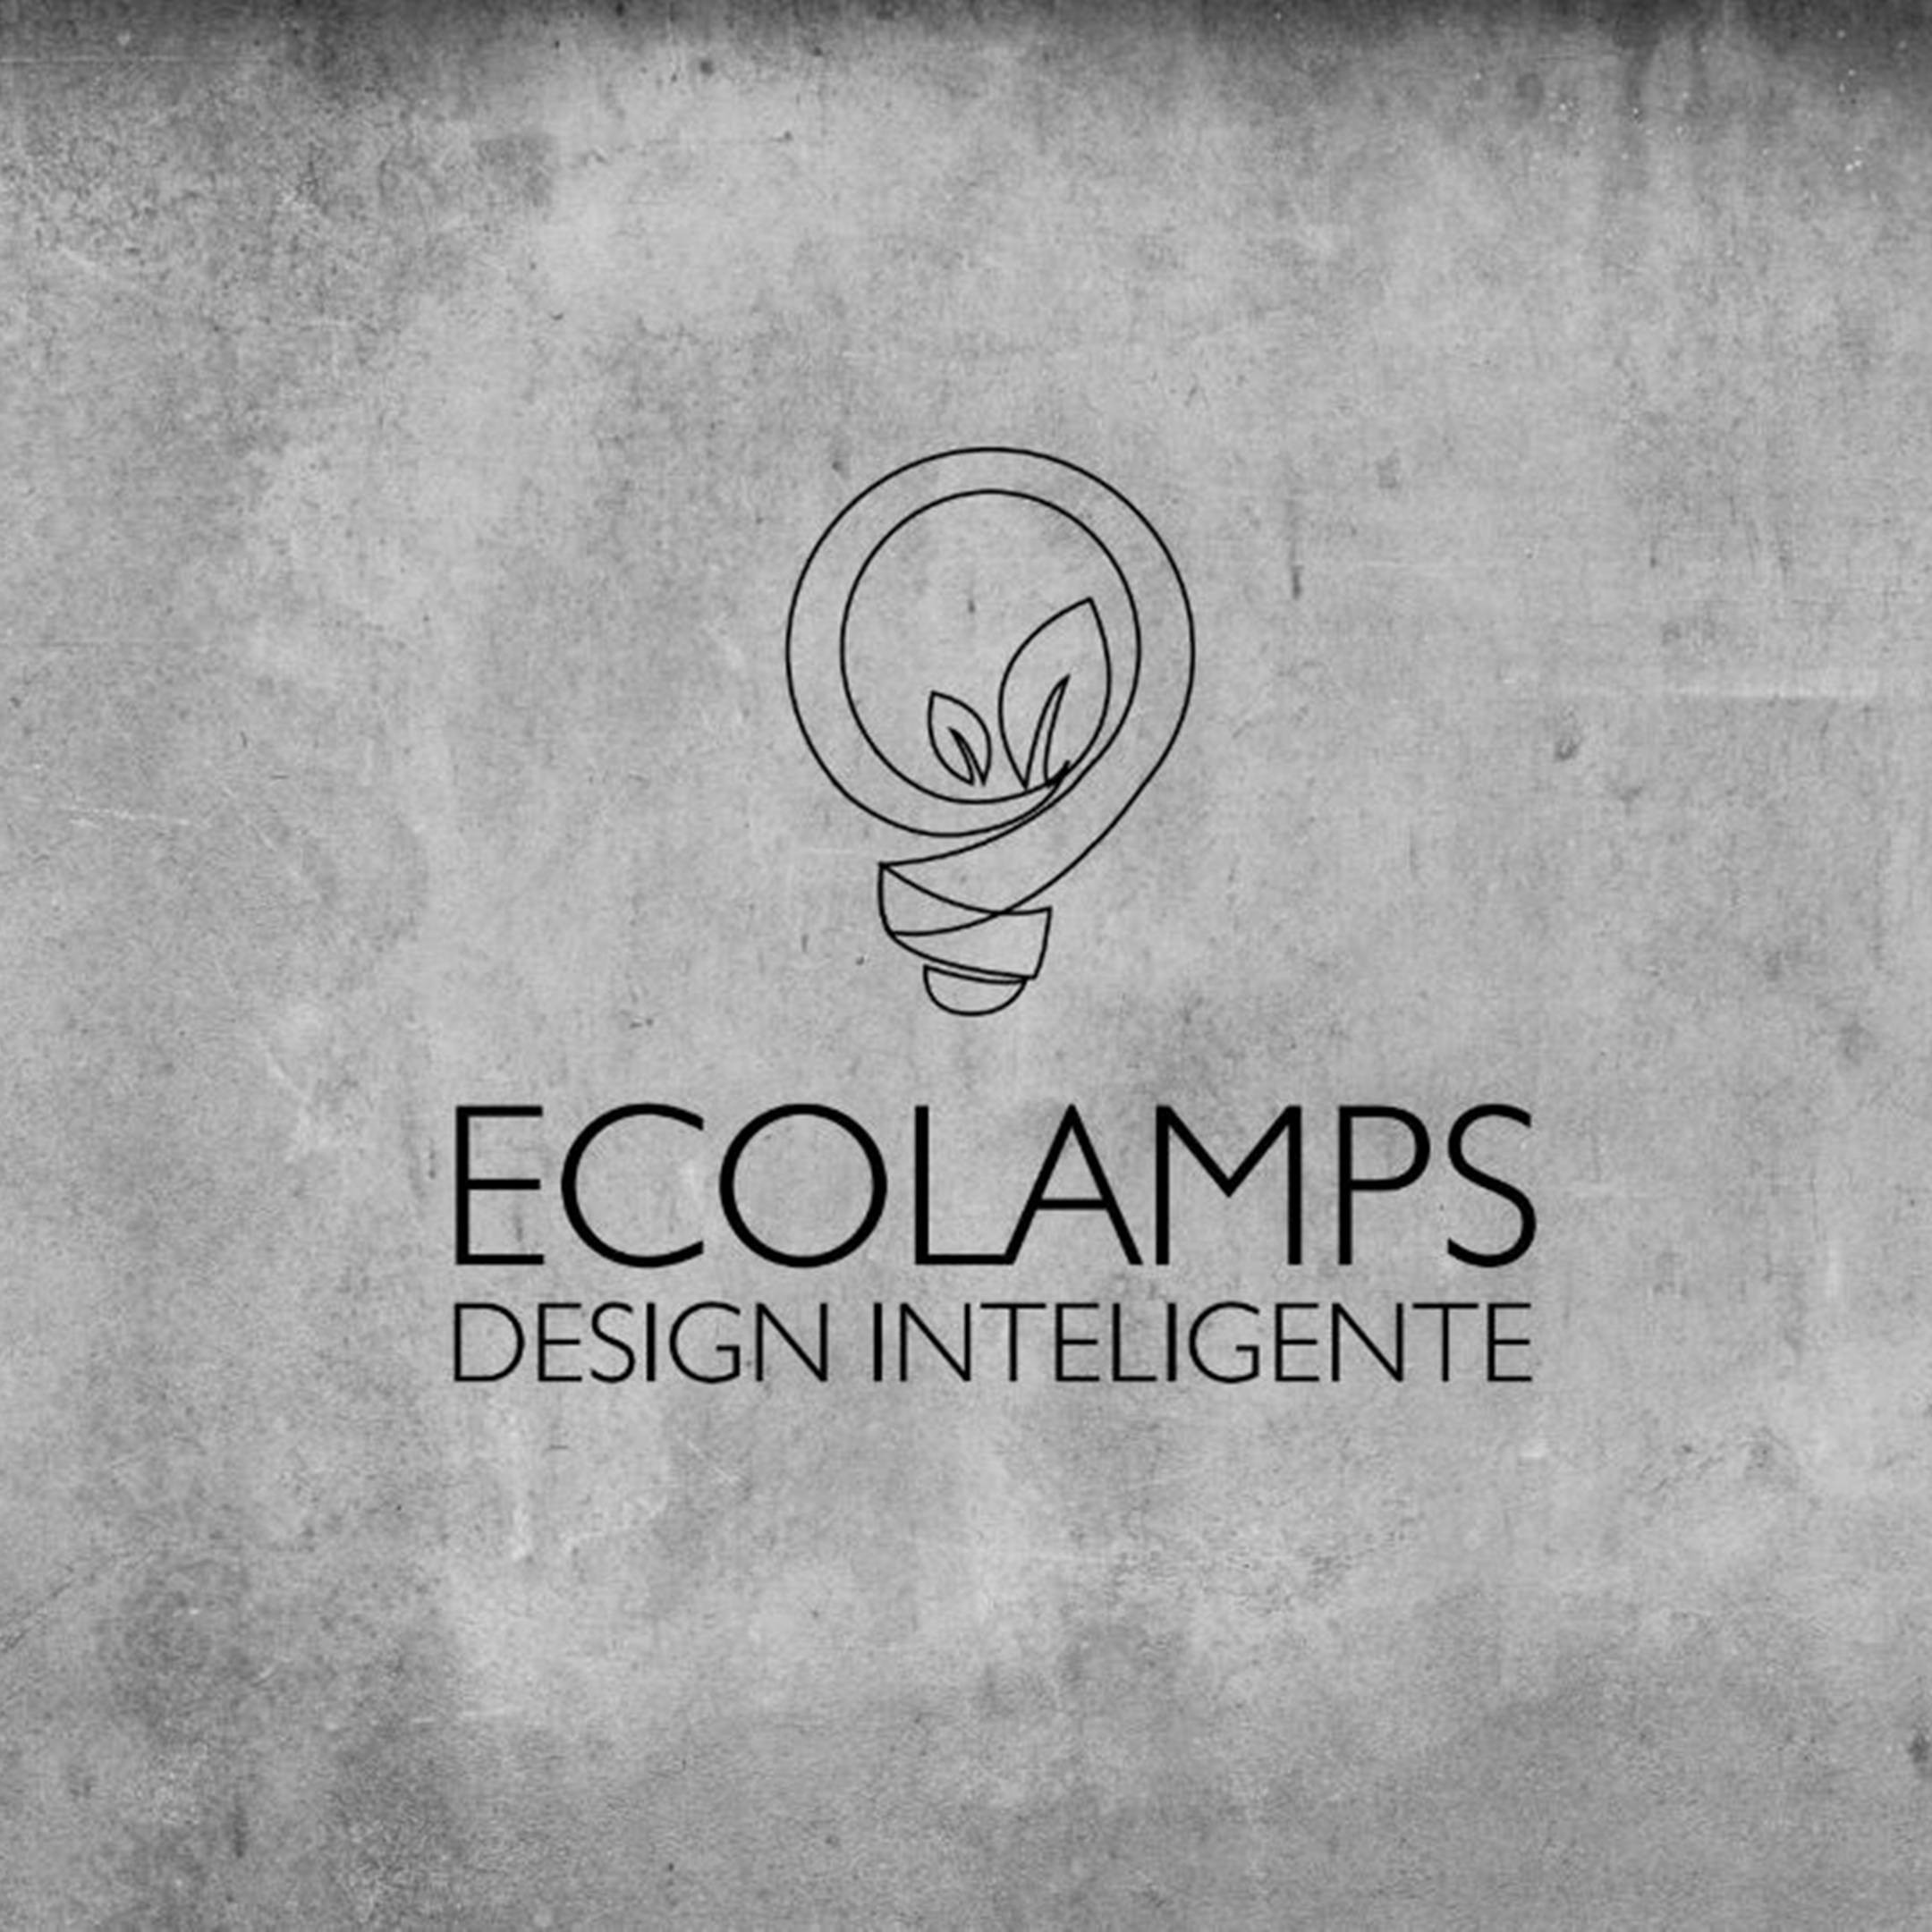 Ecolamps